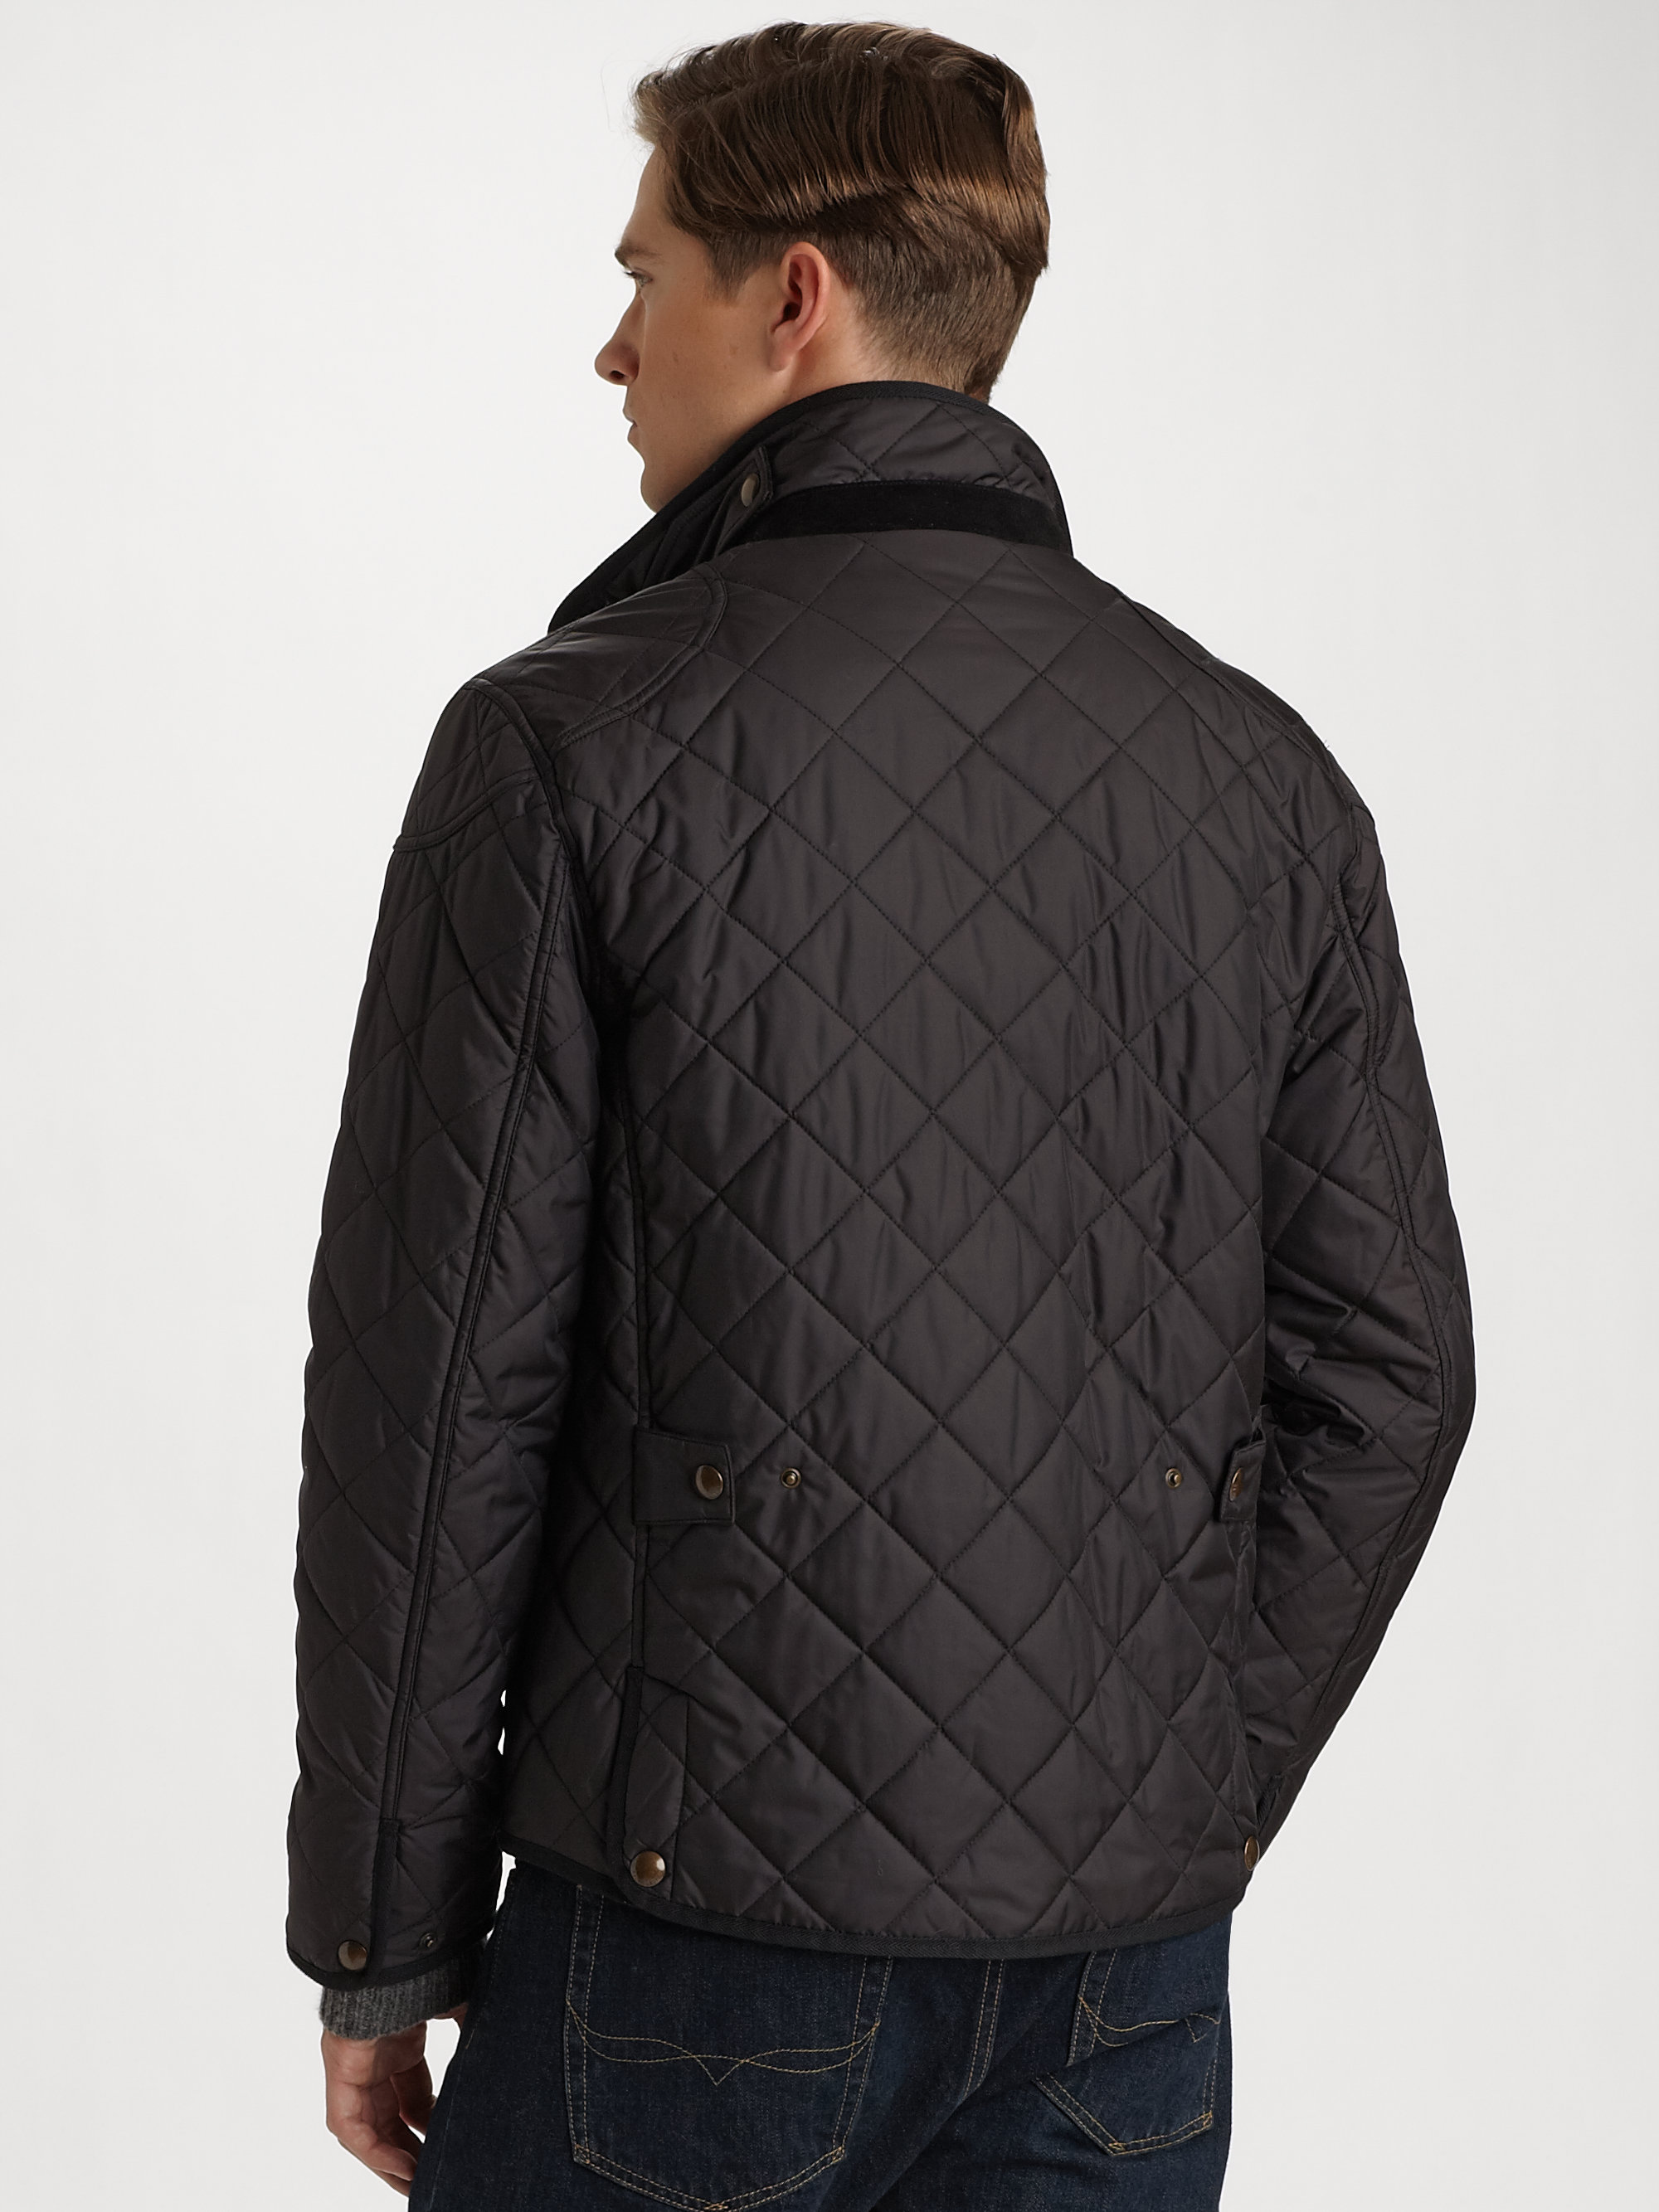 Polo Ralph Lauren Richmond Quilted Jacket in Black for Men - Lyst